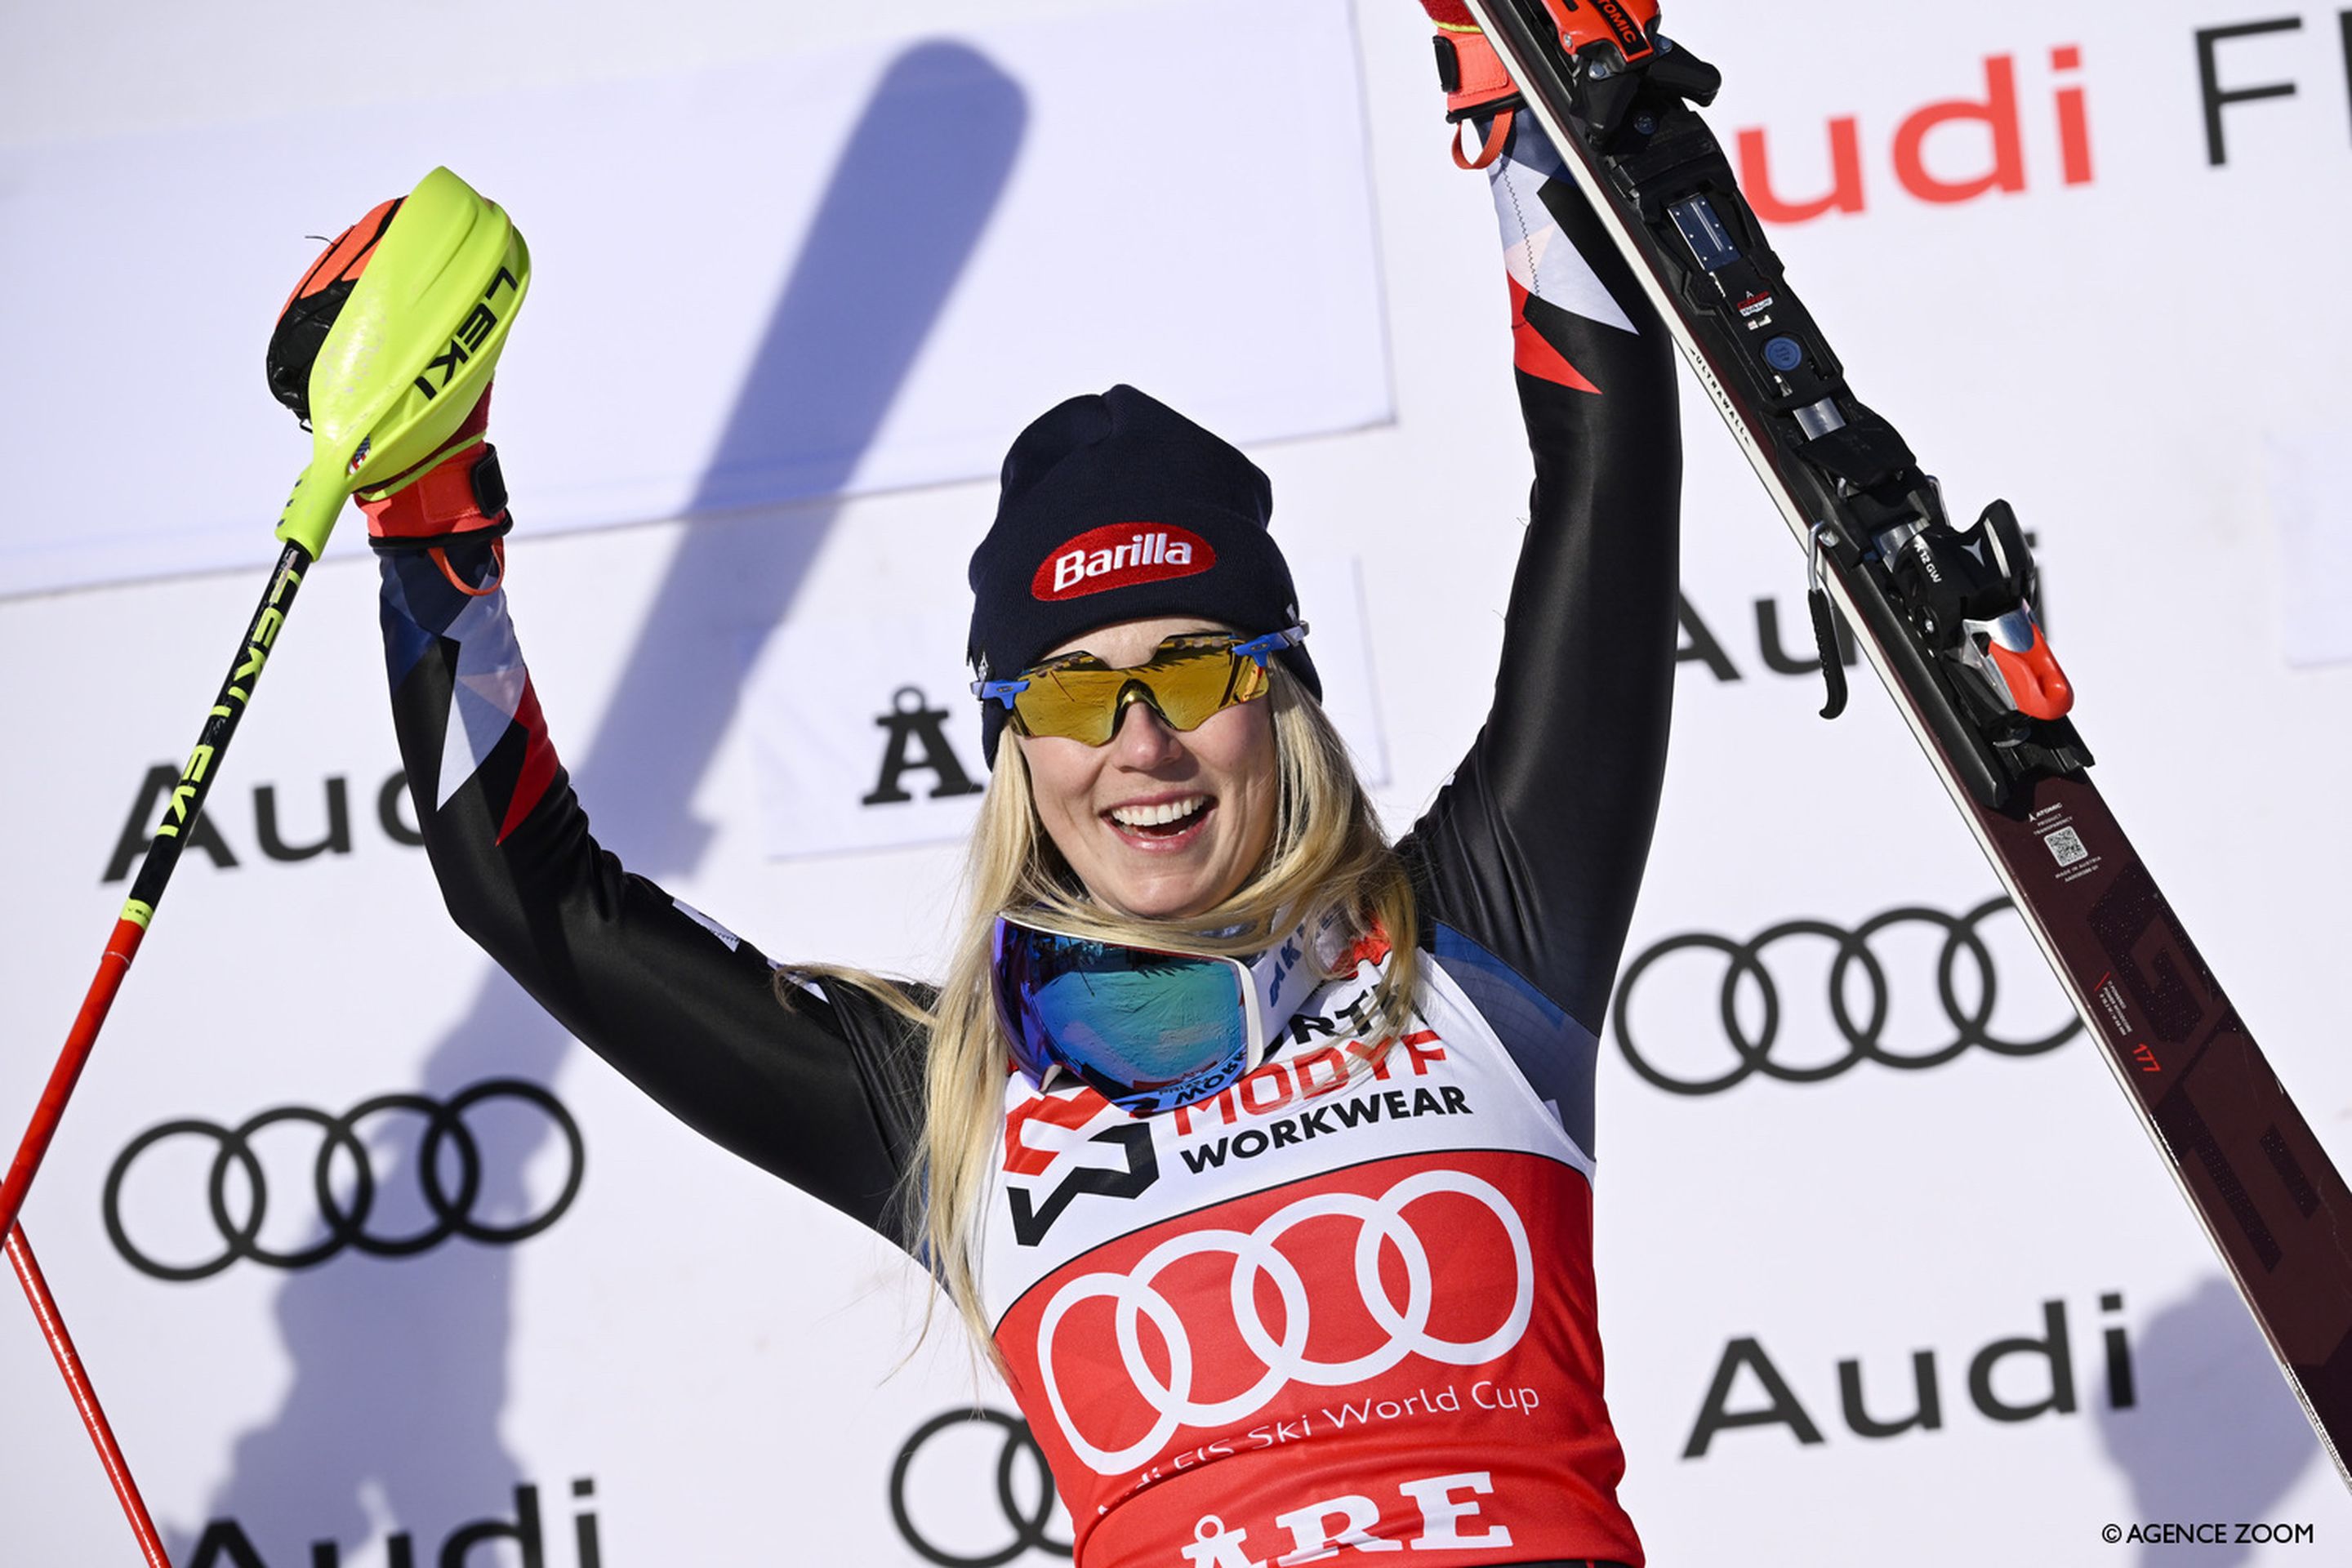 Shiffrin celebrates her 96th career World Cup win